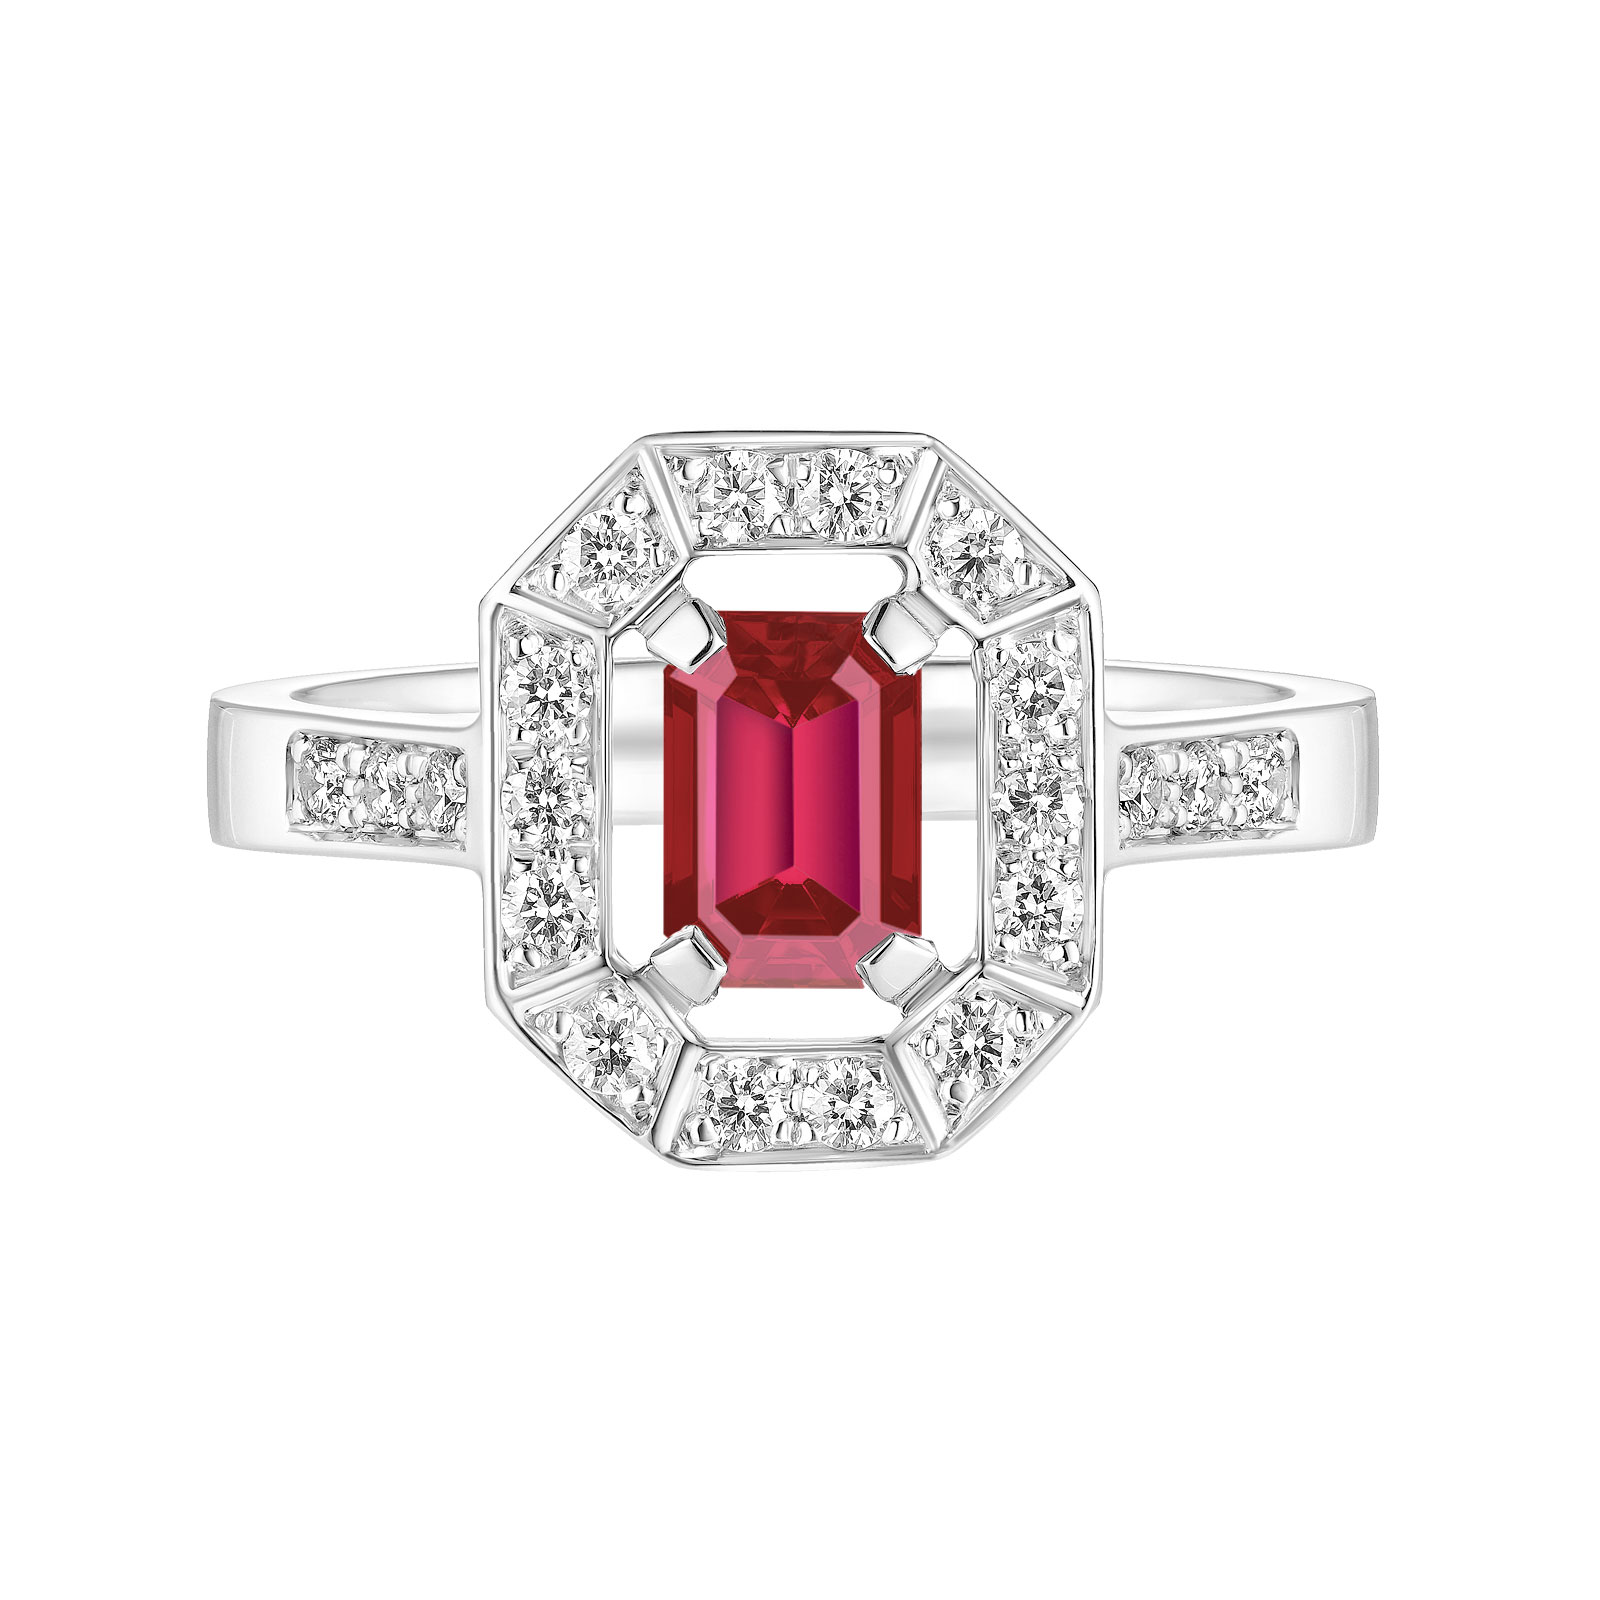 Ring White gold Ruby and diamonds Art Déco 1